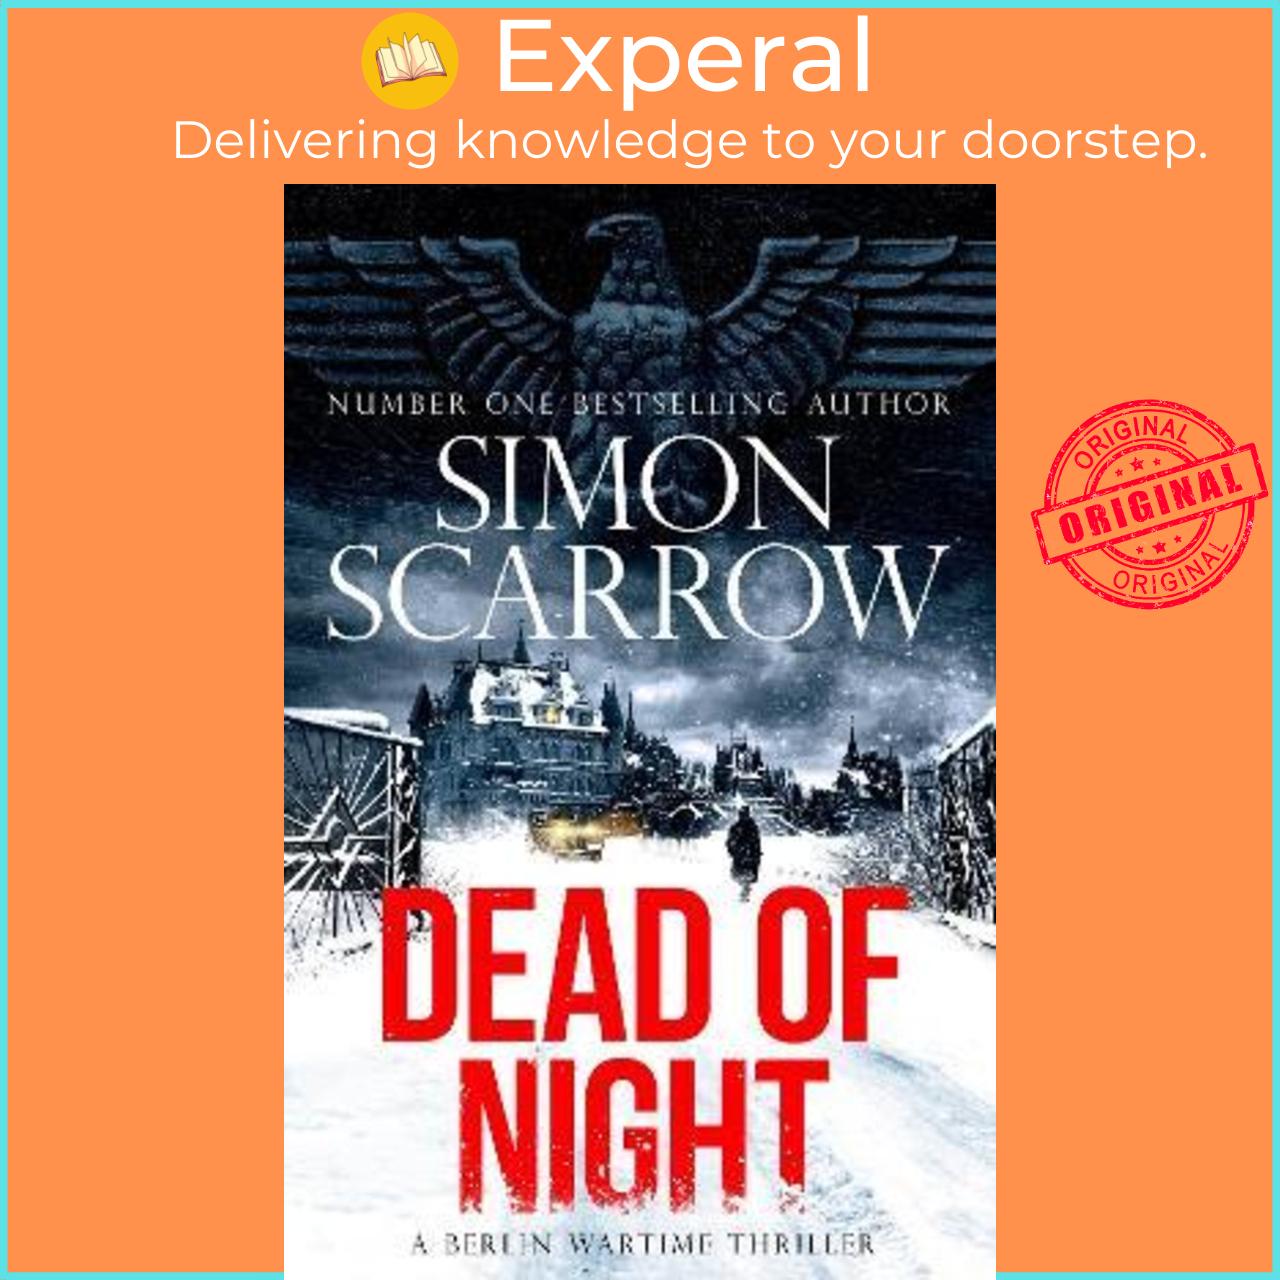 Hình ảnh Sách - Dead of Night : The chilling new thriller from the bestselling author by Simon Scarrow (UK edition, hardcover)